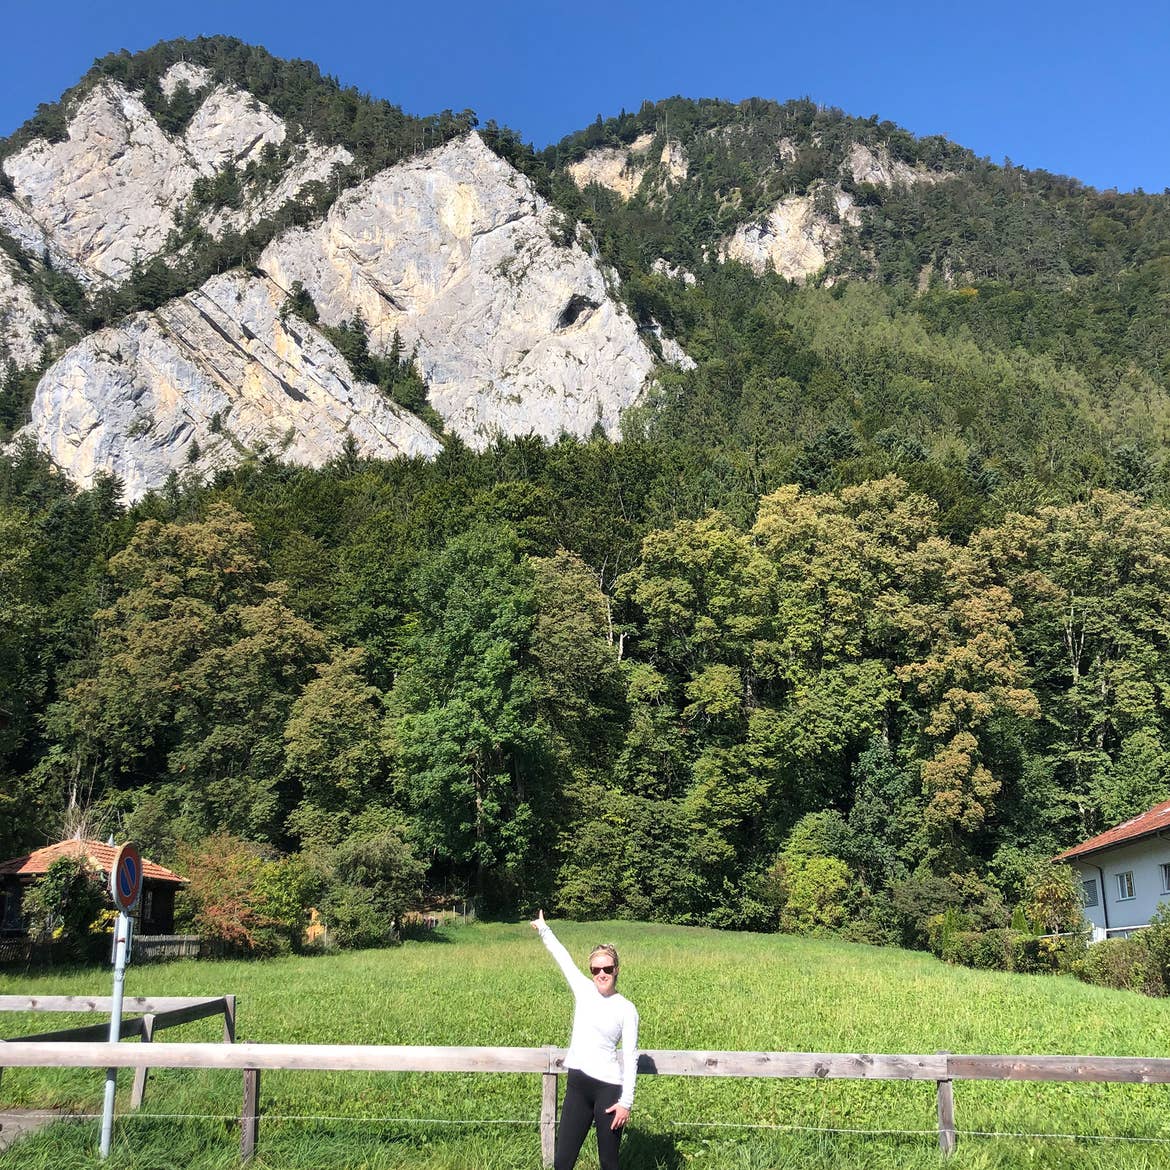 Co-author, Molly, wears a white shirt and black shorts while posing in front of a mountain in Switzerland.